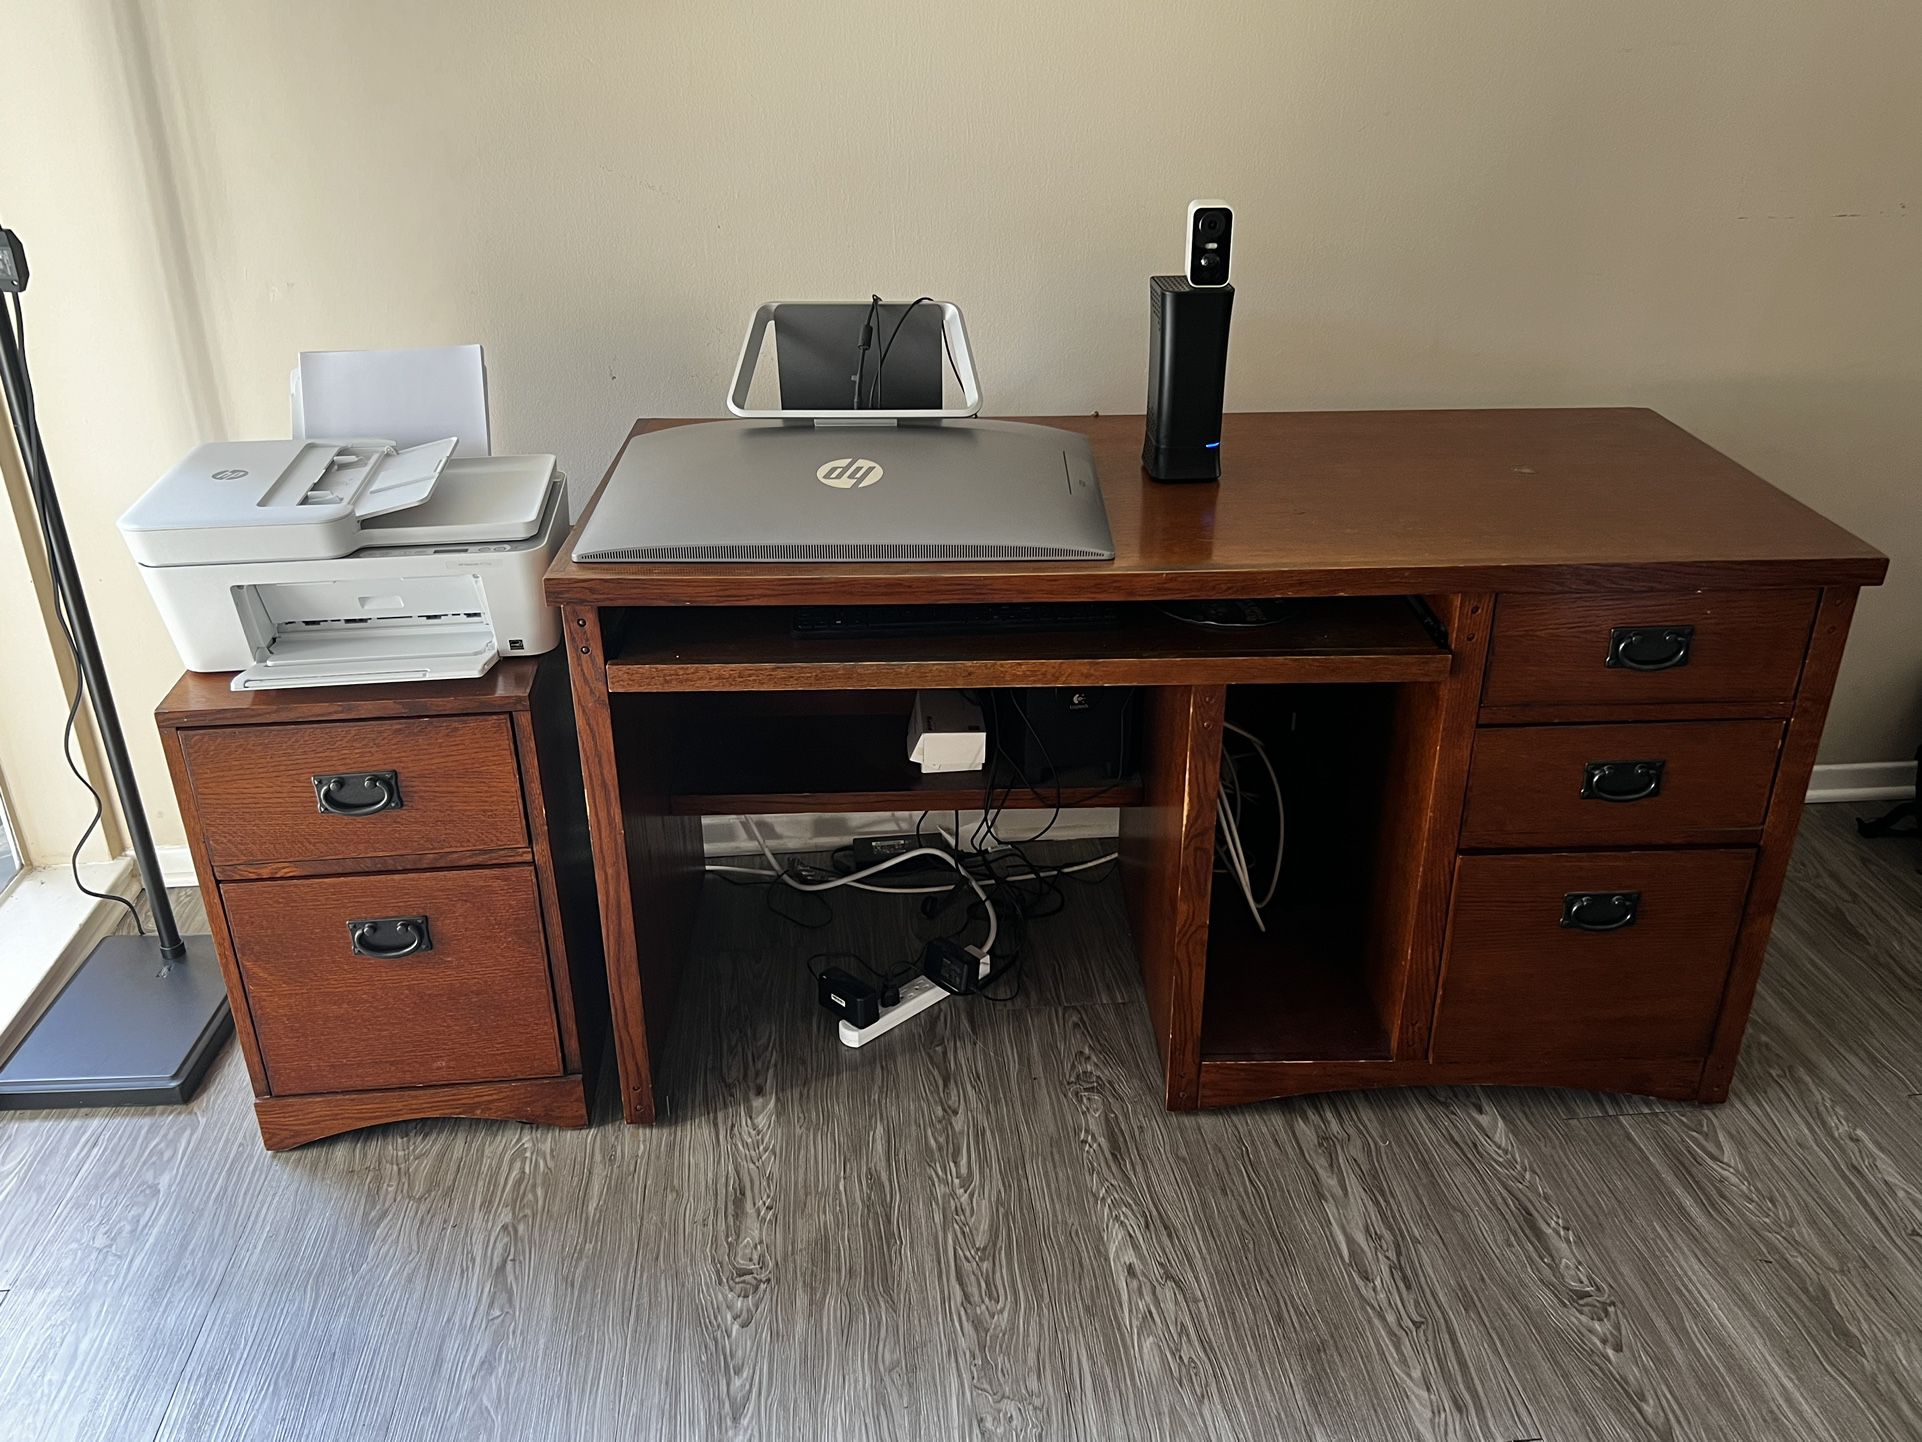 *Free** Wooden Desk and file Cabinet